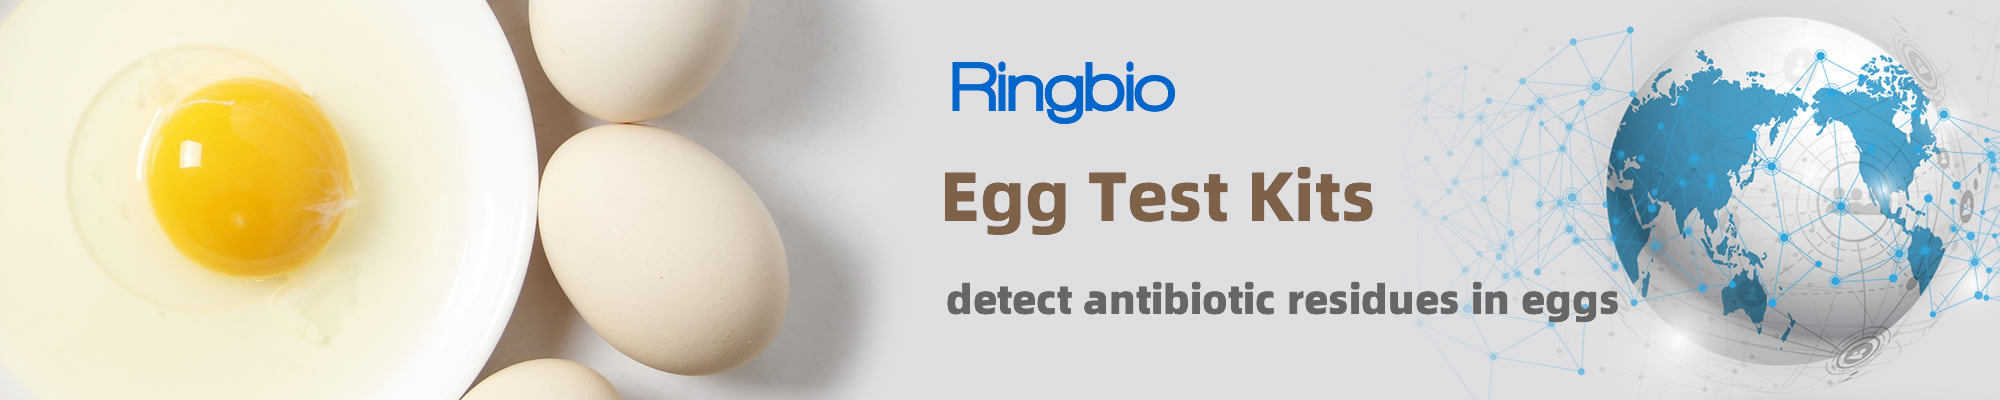 Rapid Test Kits to detect antibiotics in Eggs in 10min with simple dilution